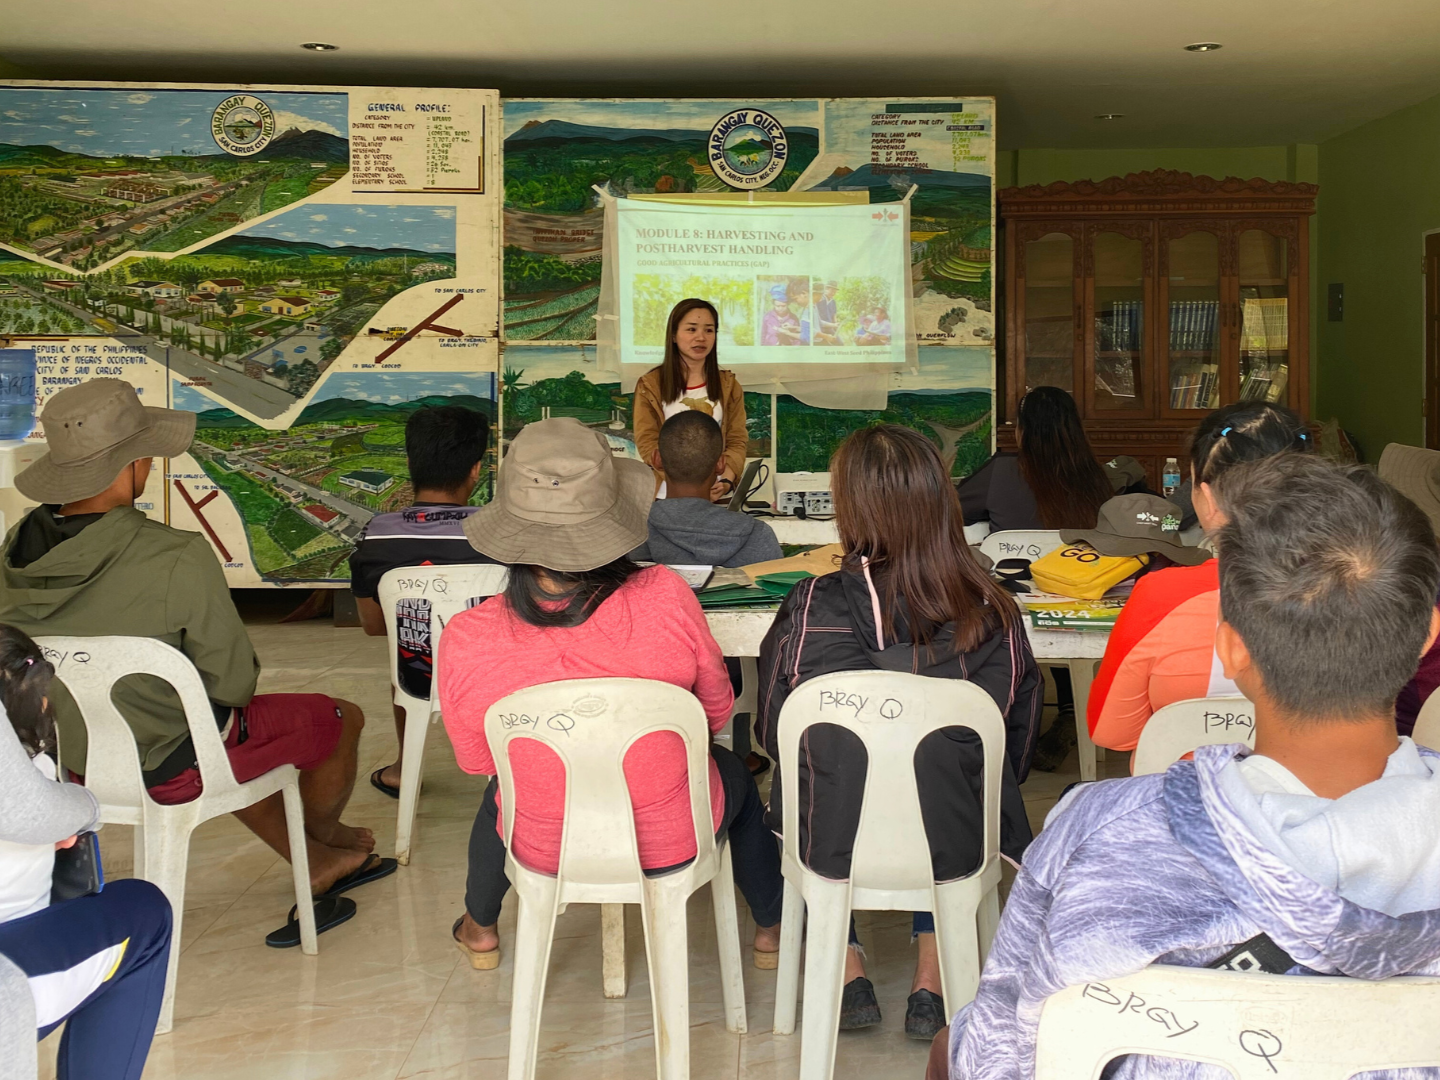 EWS-KT staff holds a classroom training on harvesting and post-harvest handling.